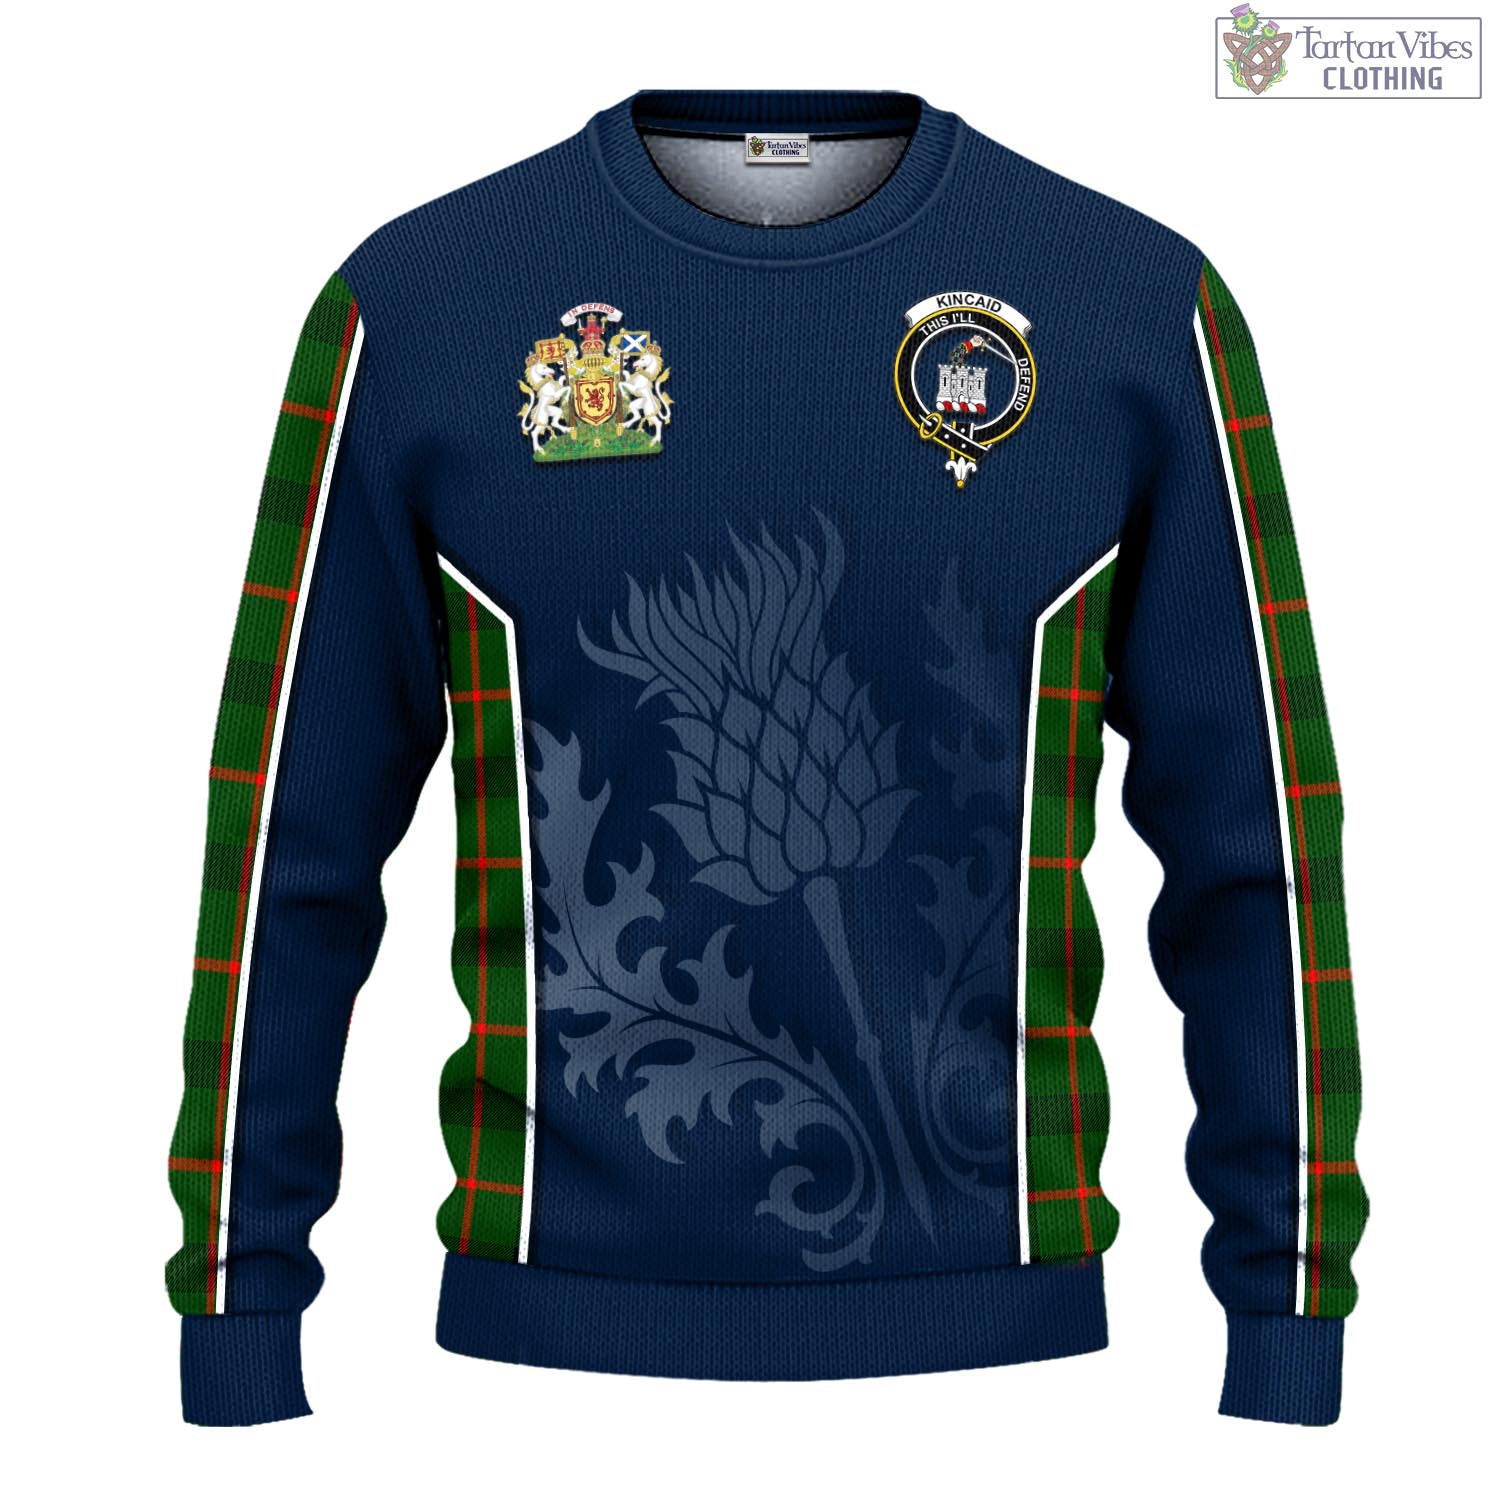 Tartan Vibes Clothing Kincaid Modern Tartan Knitted Sweatshirt with Family Crest and Scottish Thistle Vibes Sport Style